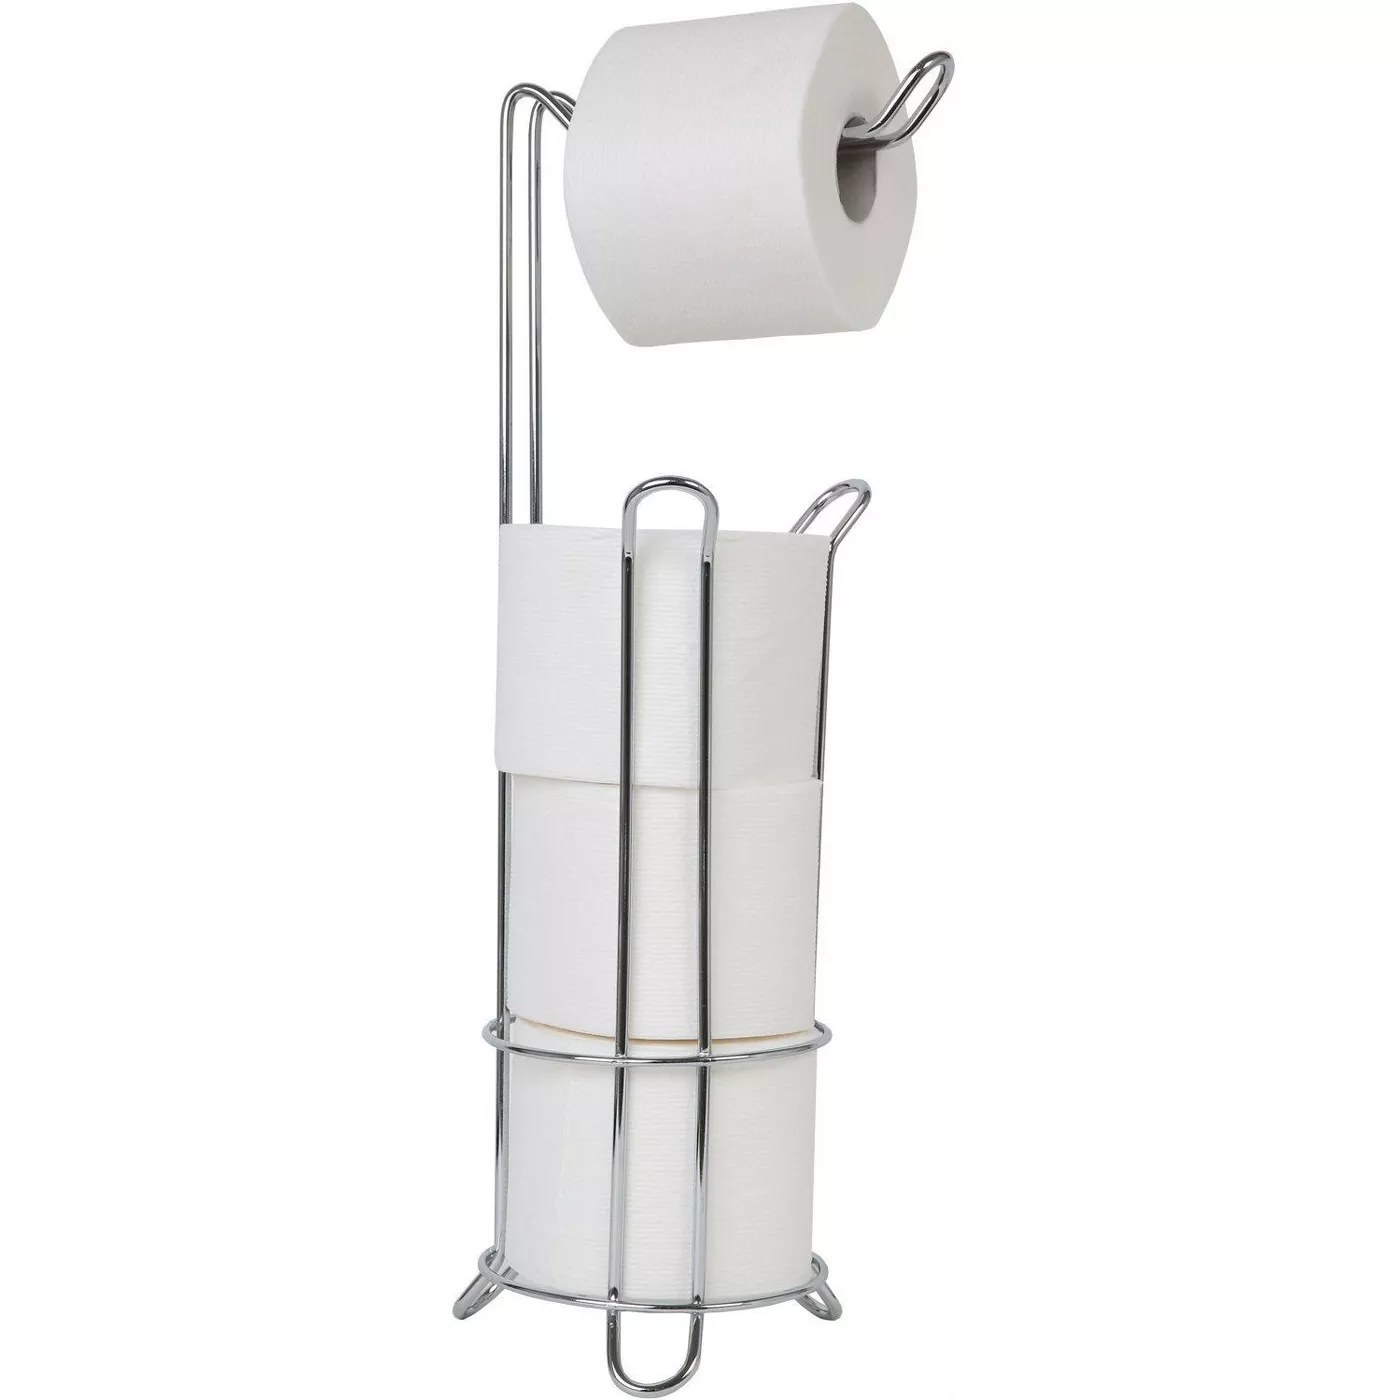 The stainless steel toilet paper roll holder